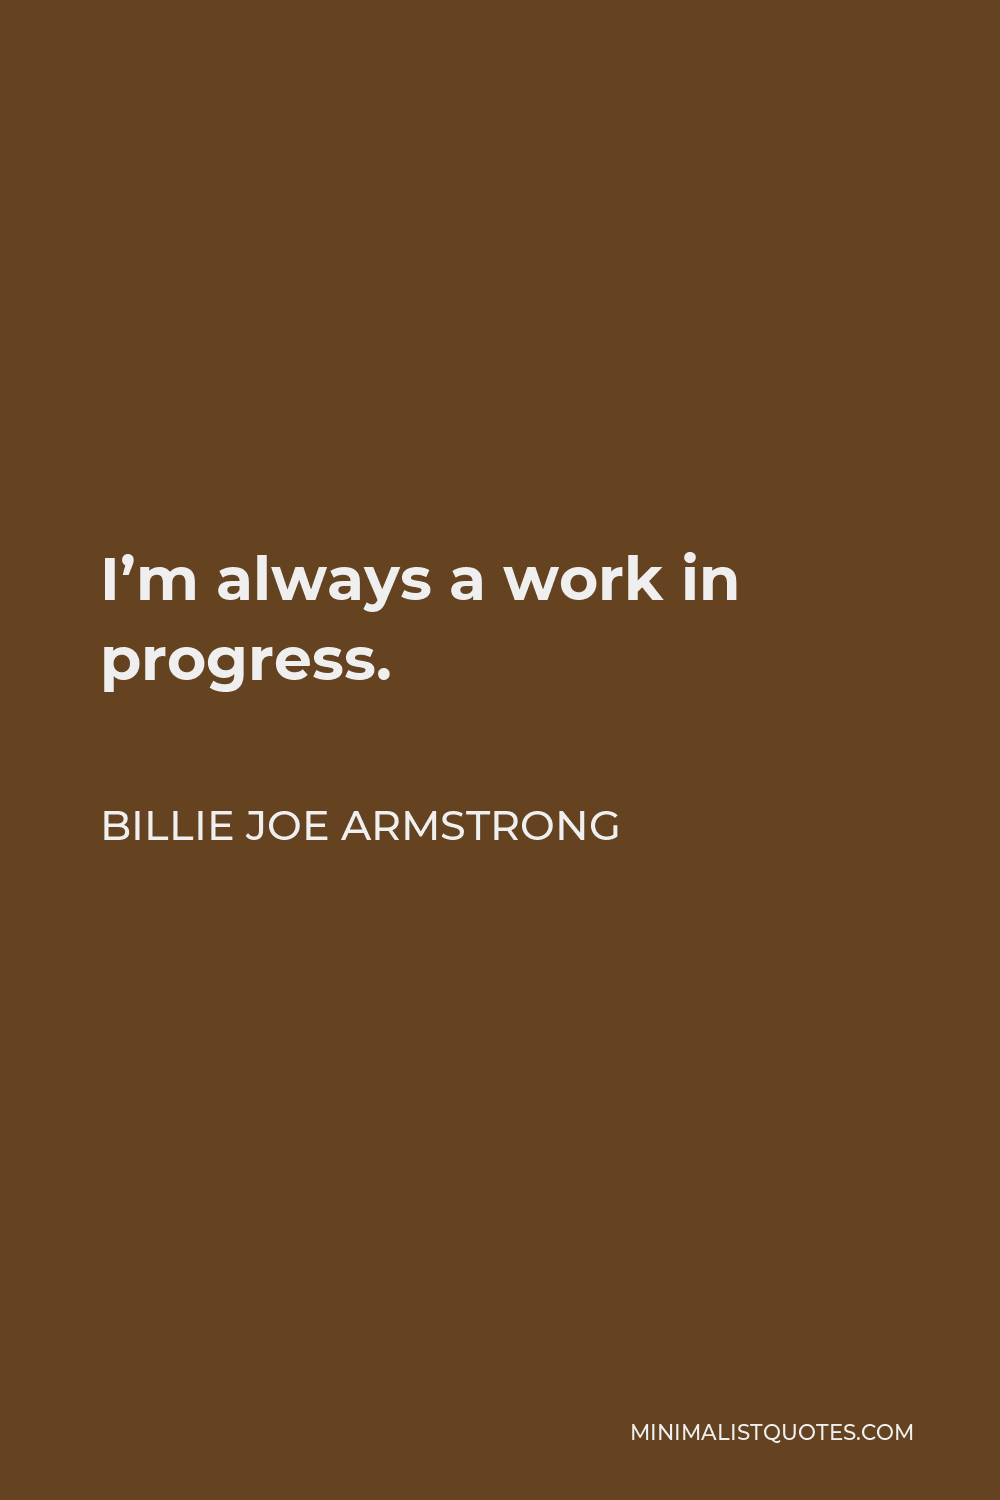 Billie Joe Armstrong Quote - I’m always a work in progress.